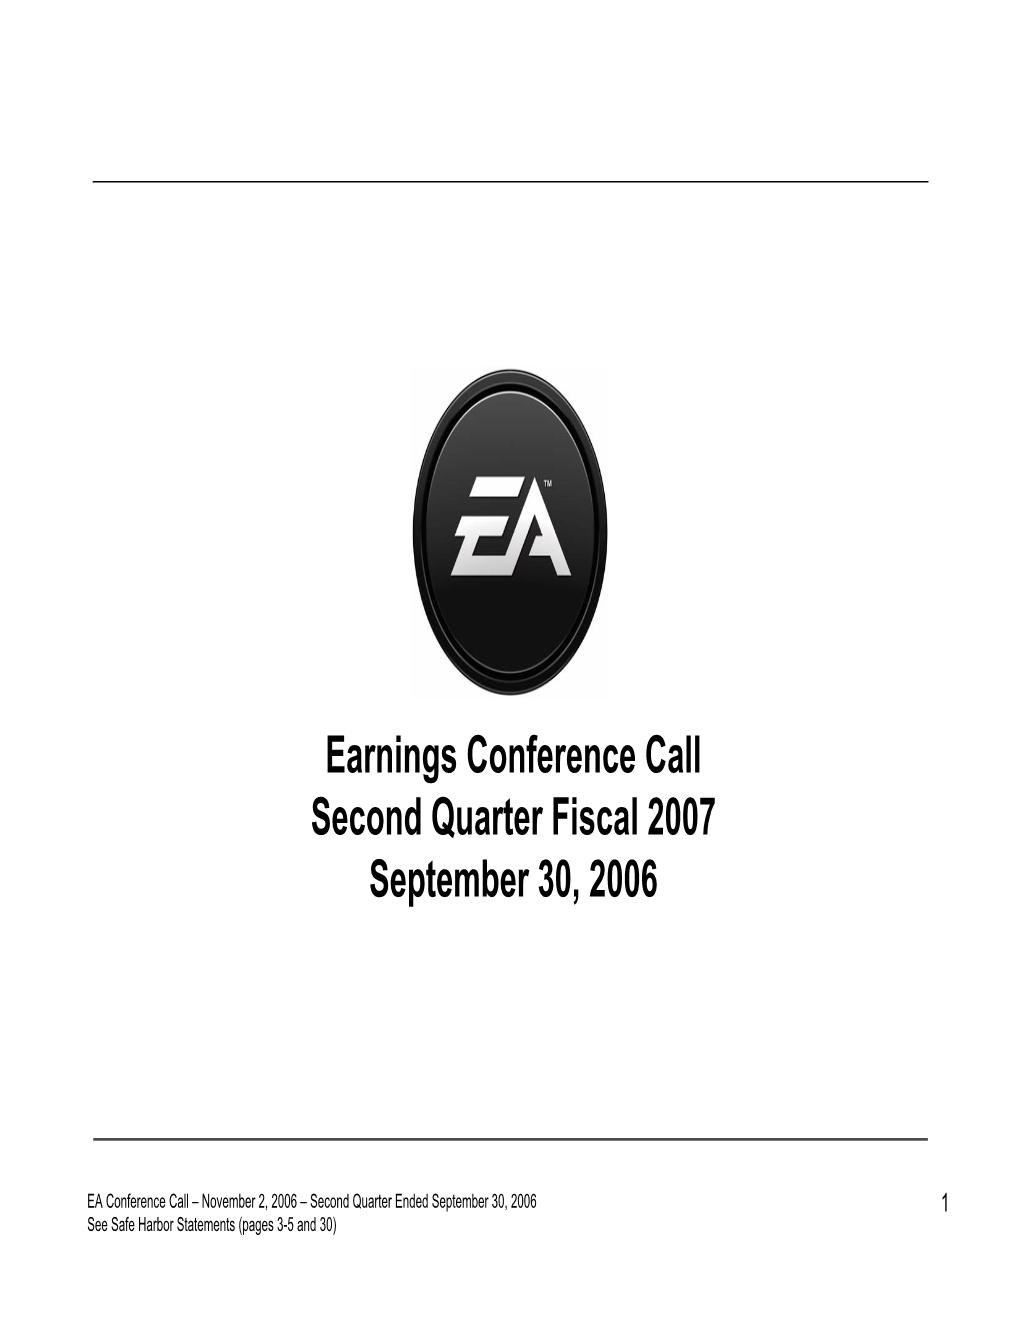 Earnings Conference Call Second Quarter Fiscal 2007 September 30, 2006